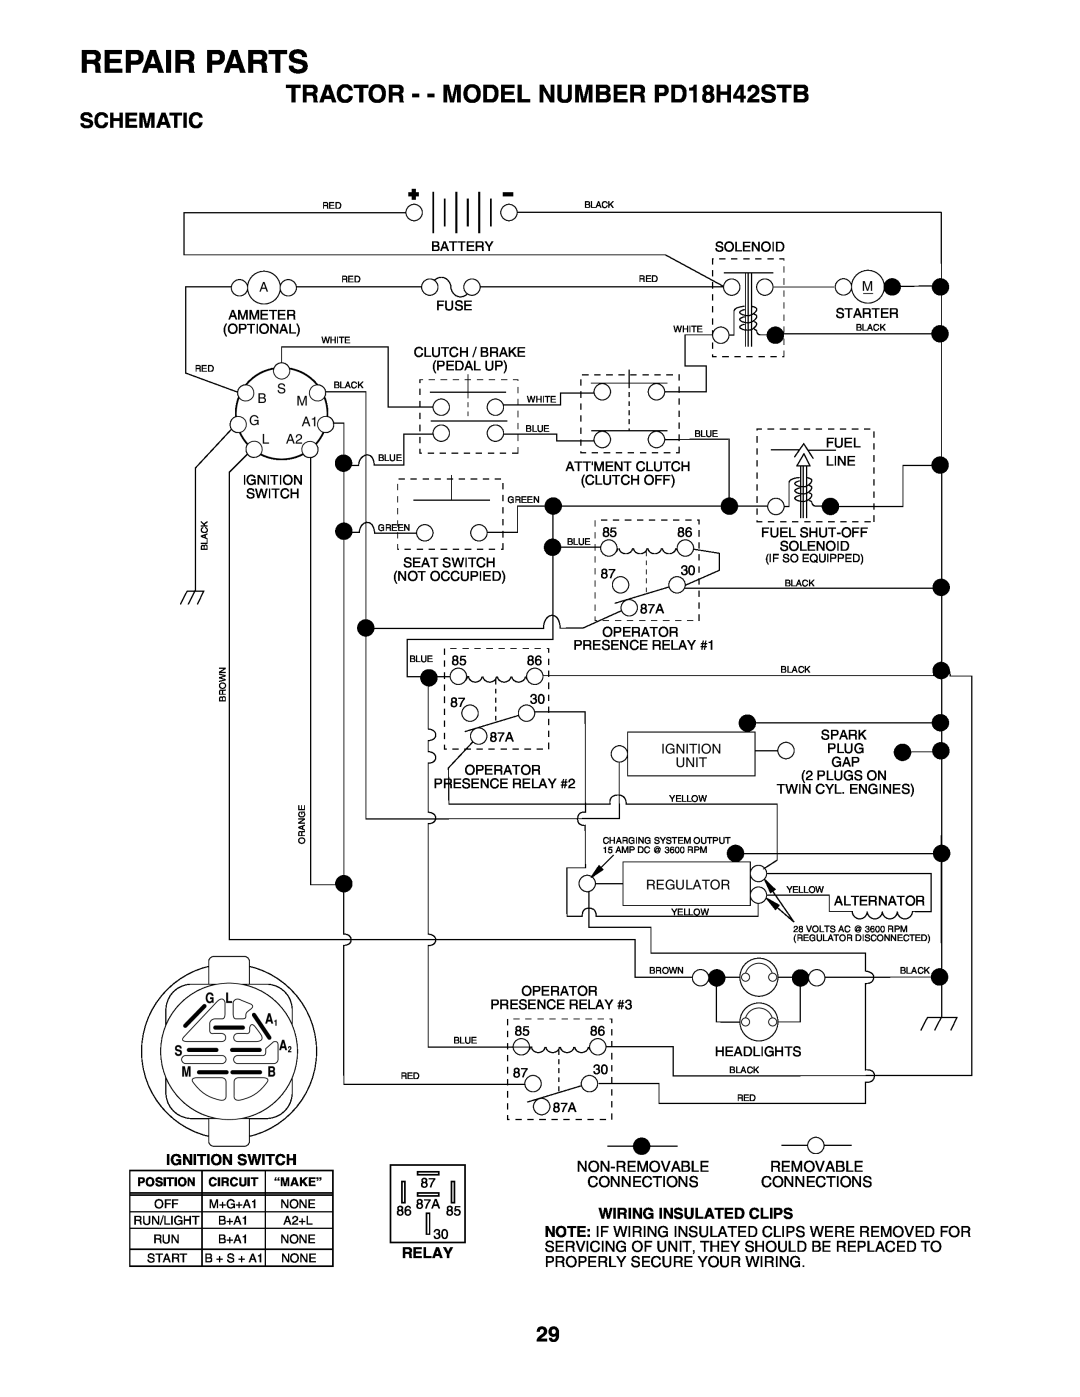 Poulan Repair Parts, TRACTOR - - MODEL NUMBER PD18H42STB, Schematic, Non-Removable Removable Connections Connections 